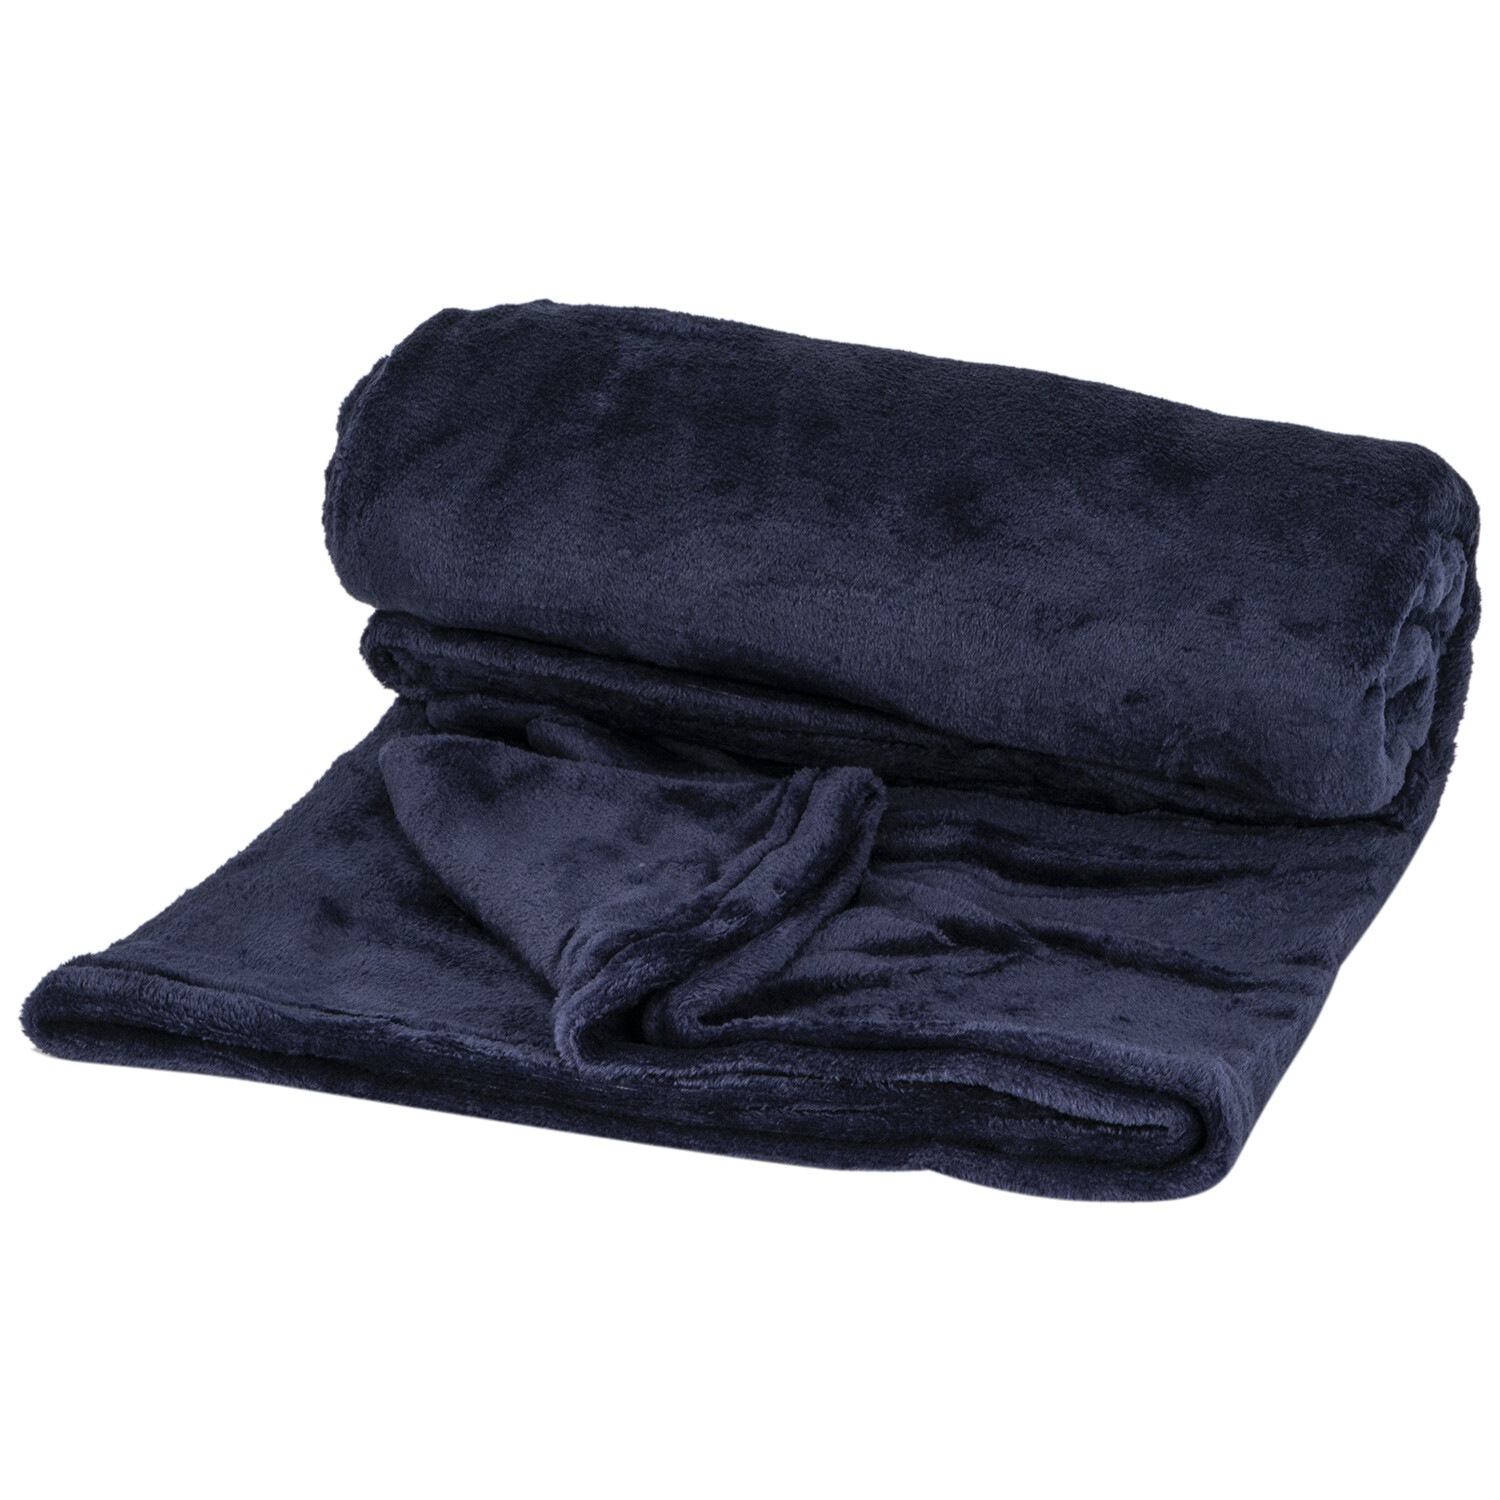 Divante Navy Supersoft Large Throw Image 2